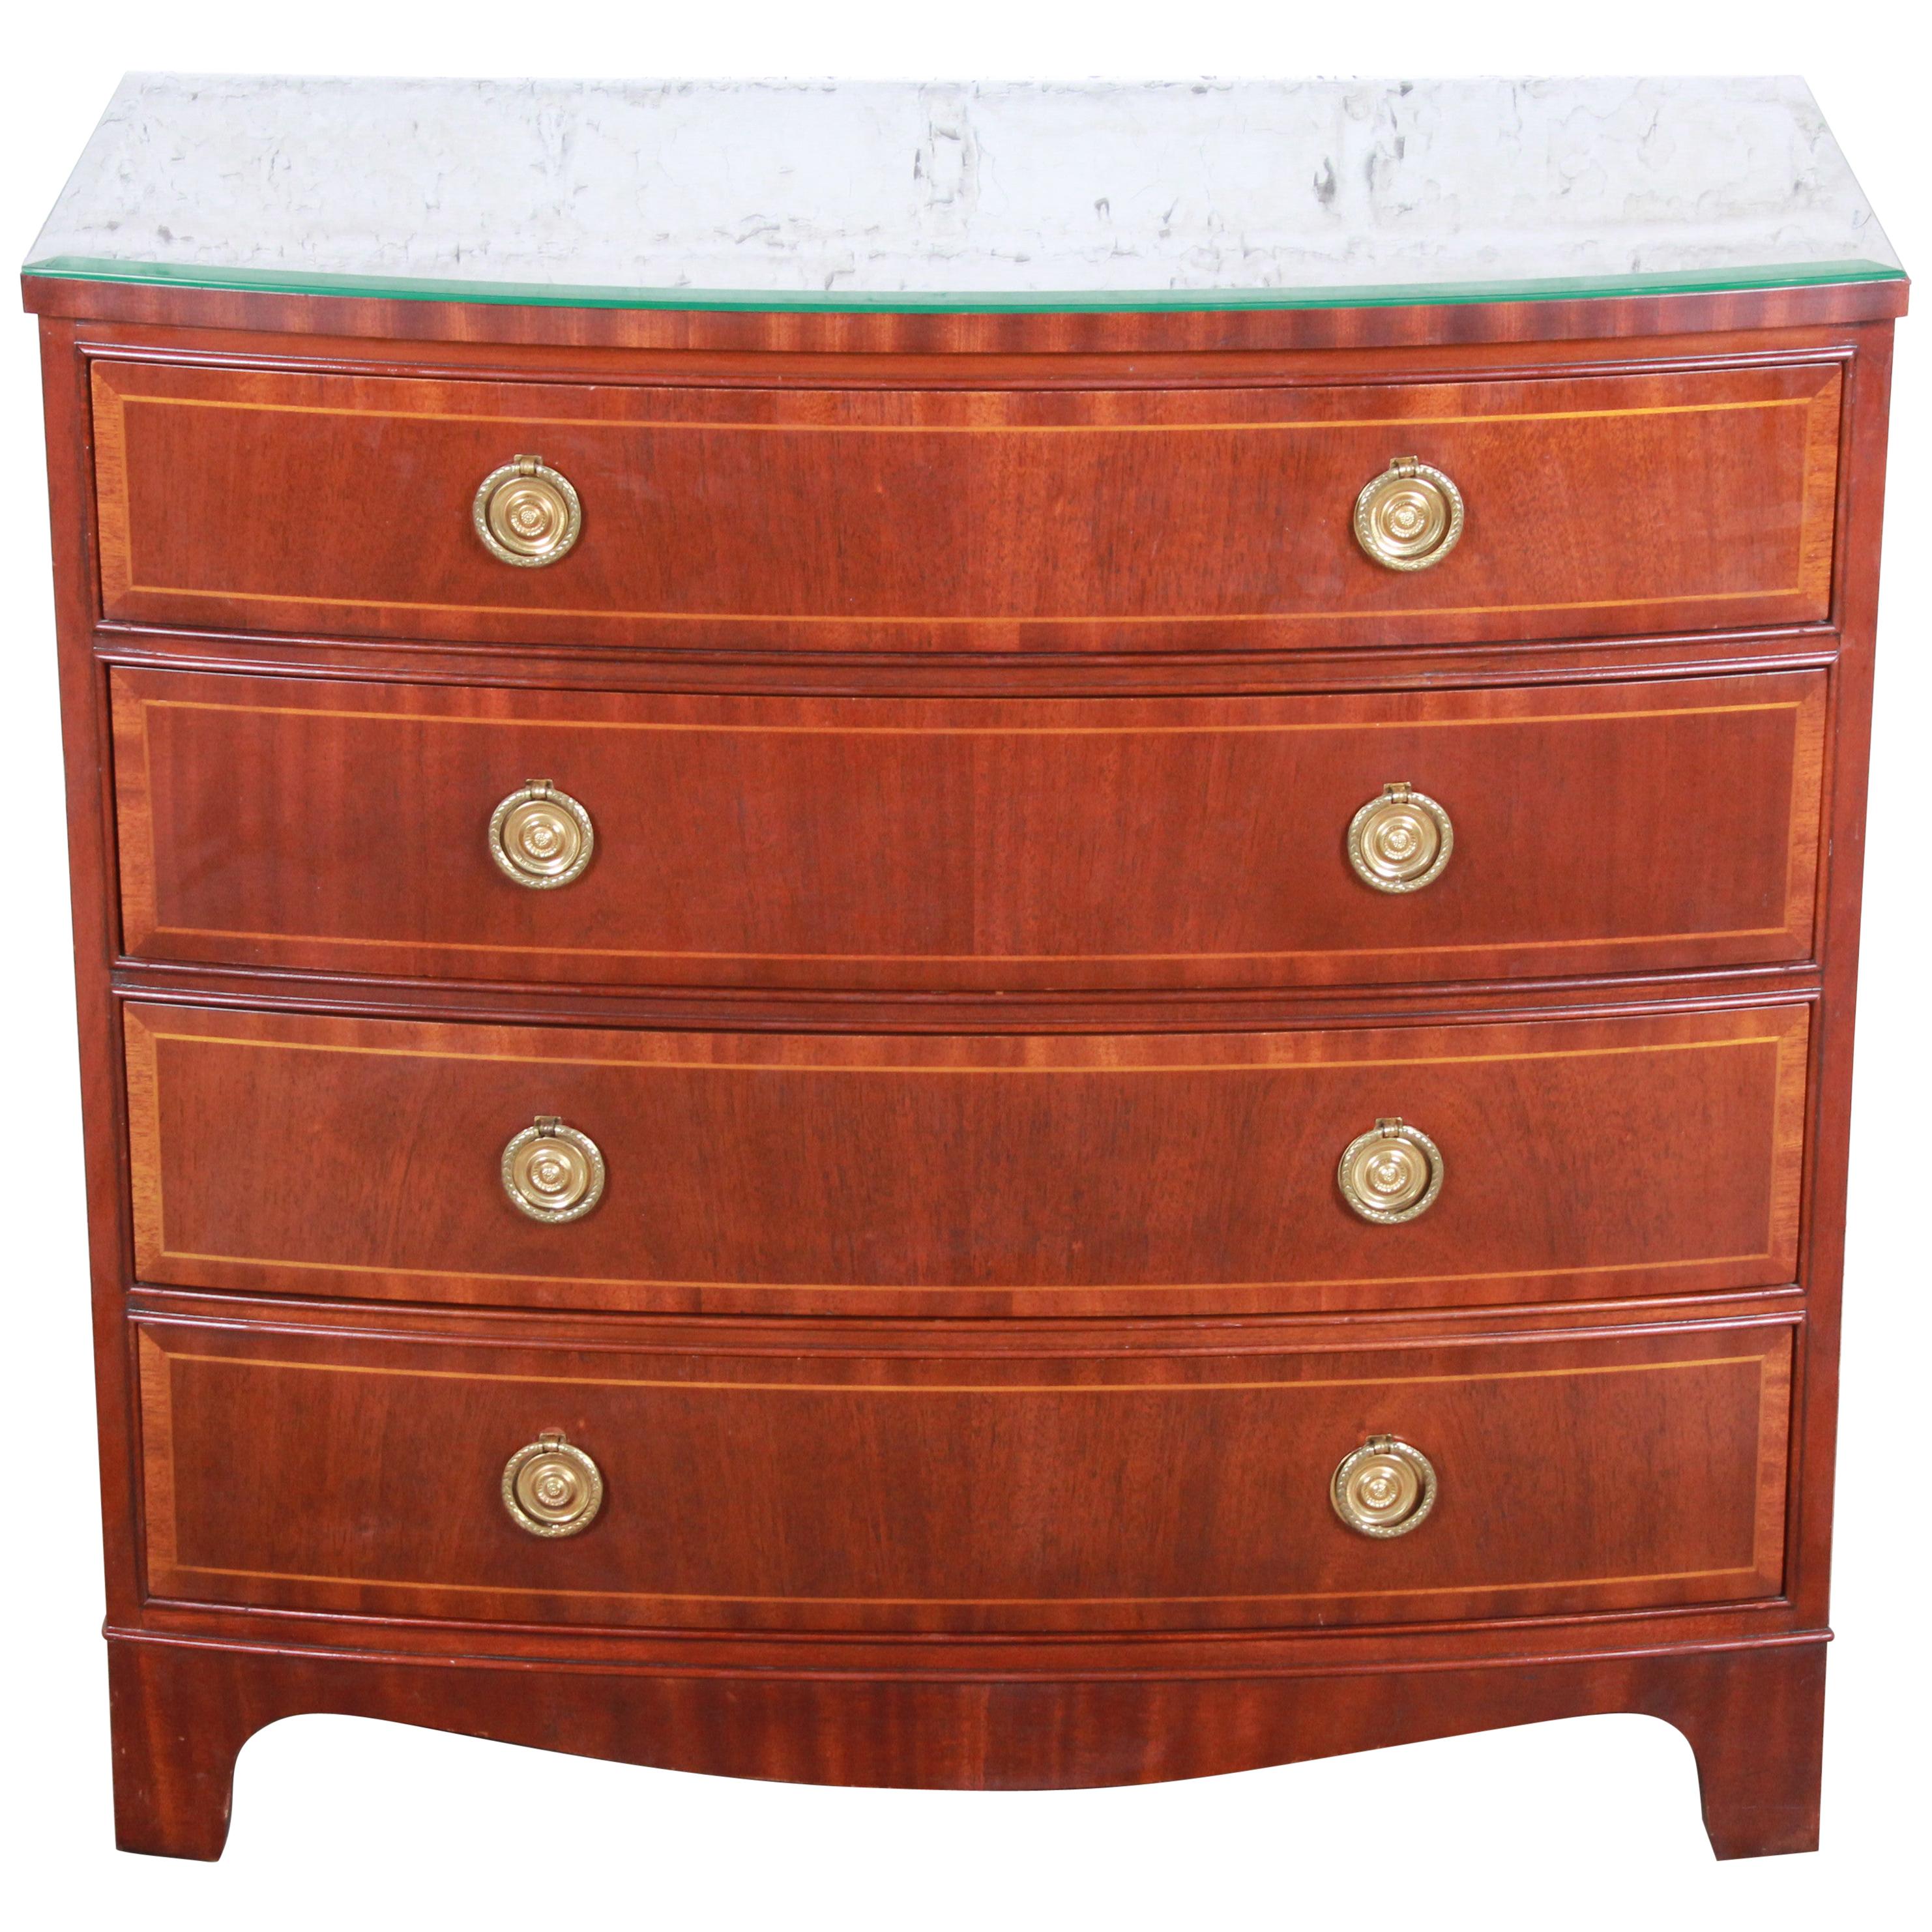 Baker Furniture Georgian Banded Mahogany Bow Front Chest of Drawers